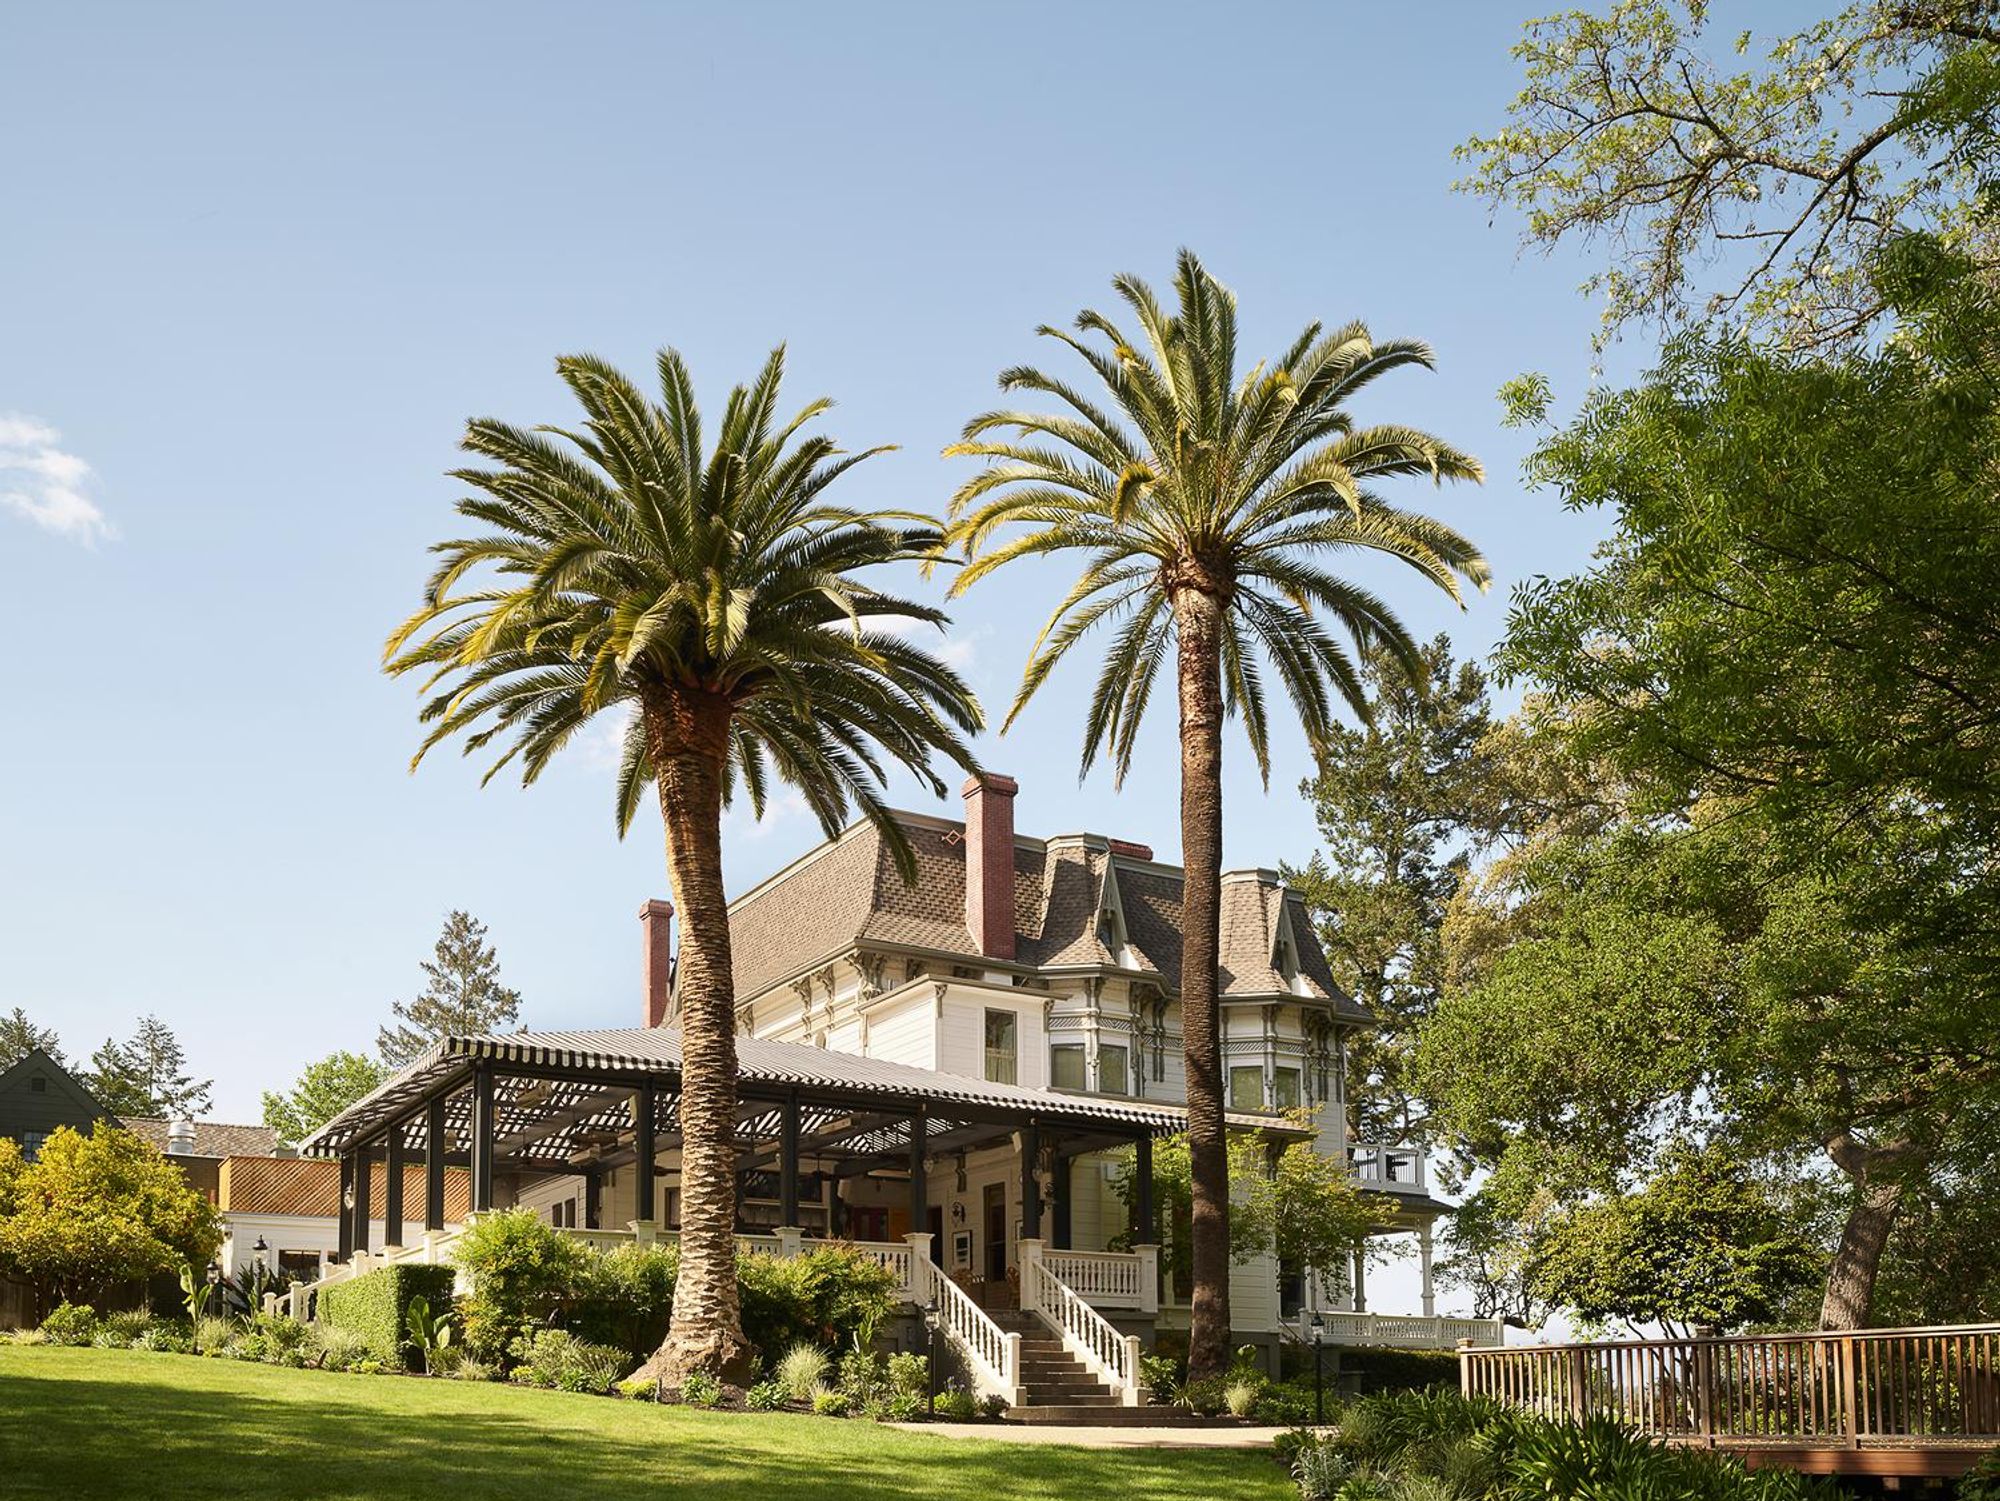 Healdsburg's 141-year old Madrona inn has never been more exquisite